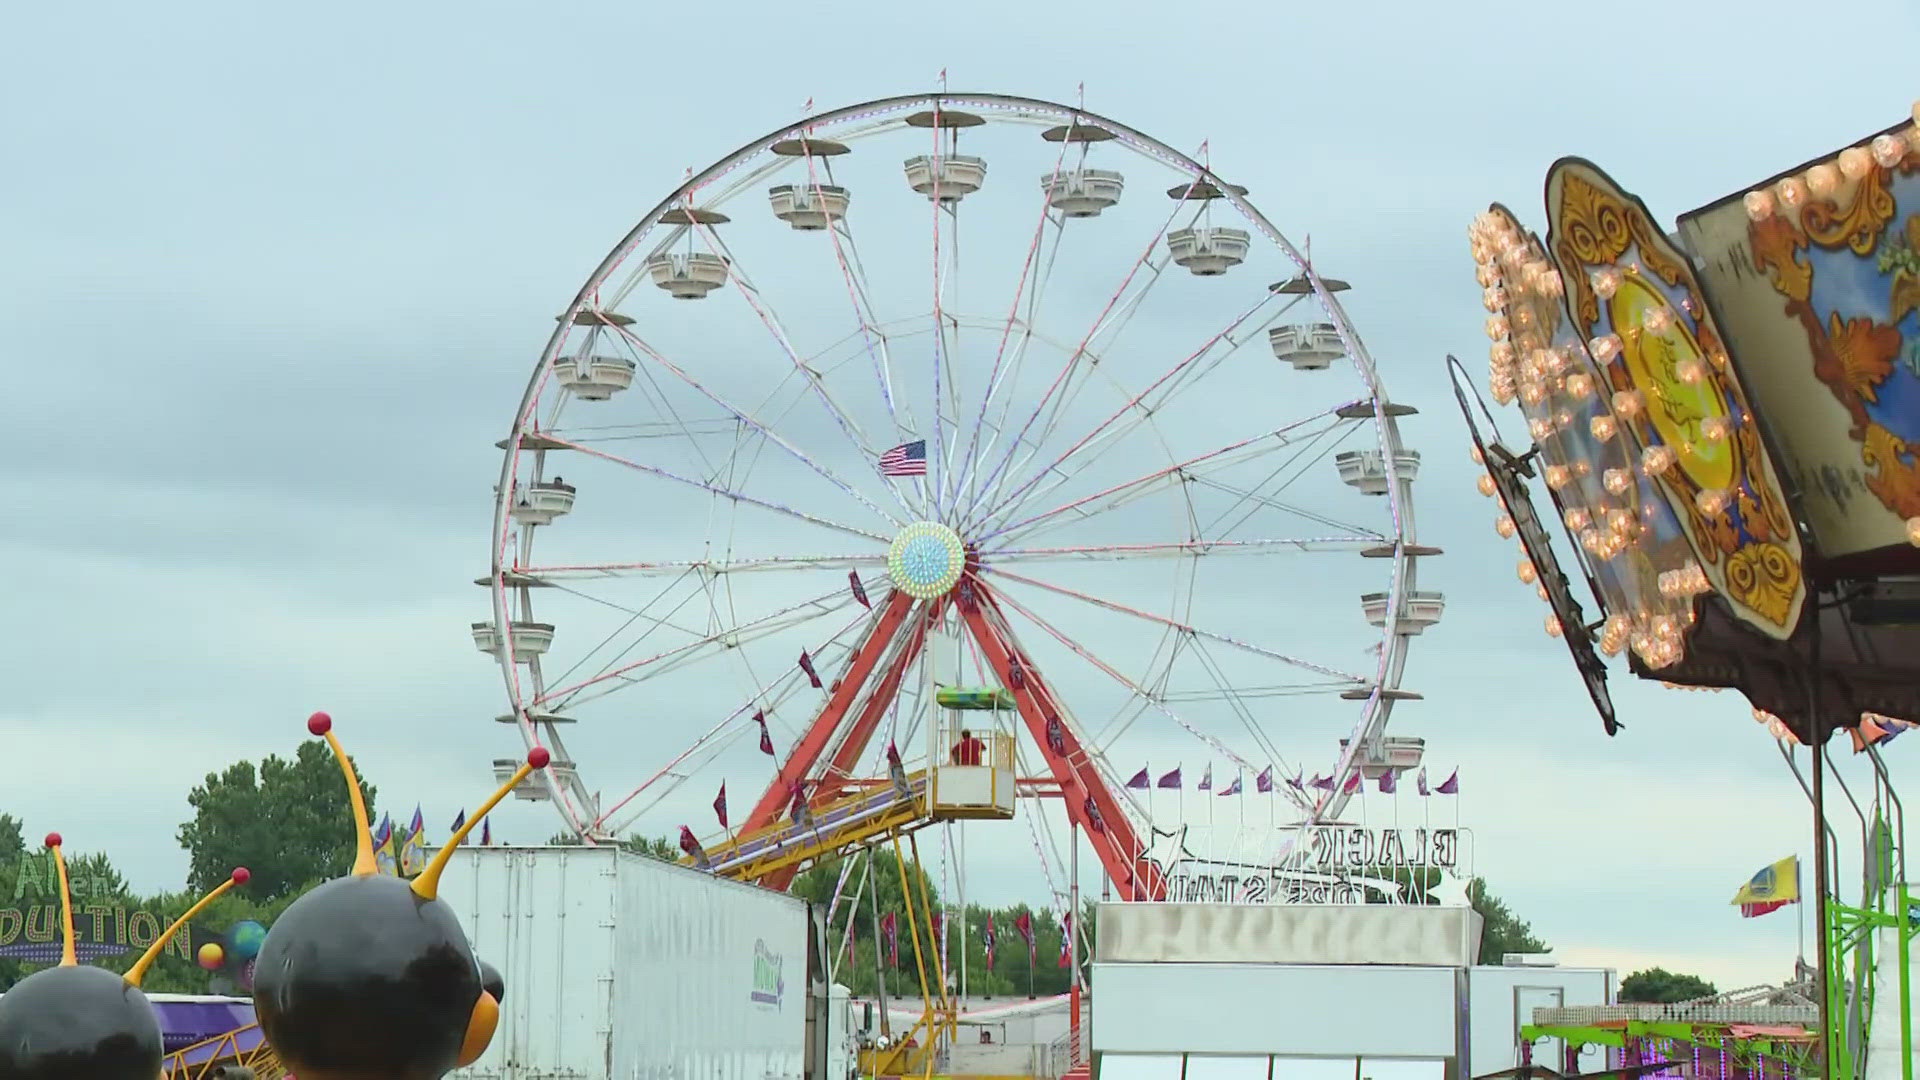 If you haven't been to the Marion County Fair this summer, time is running out.